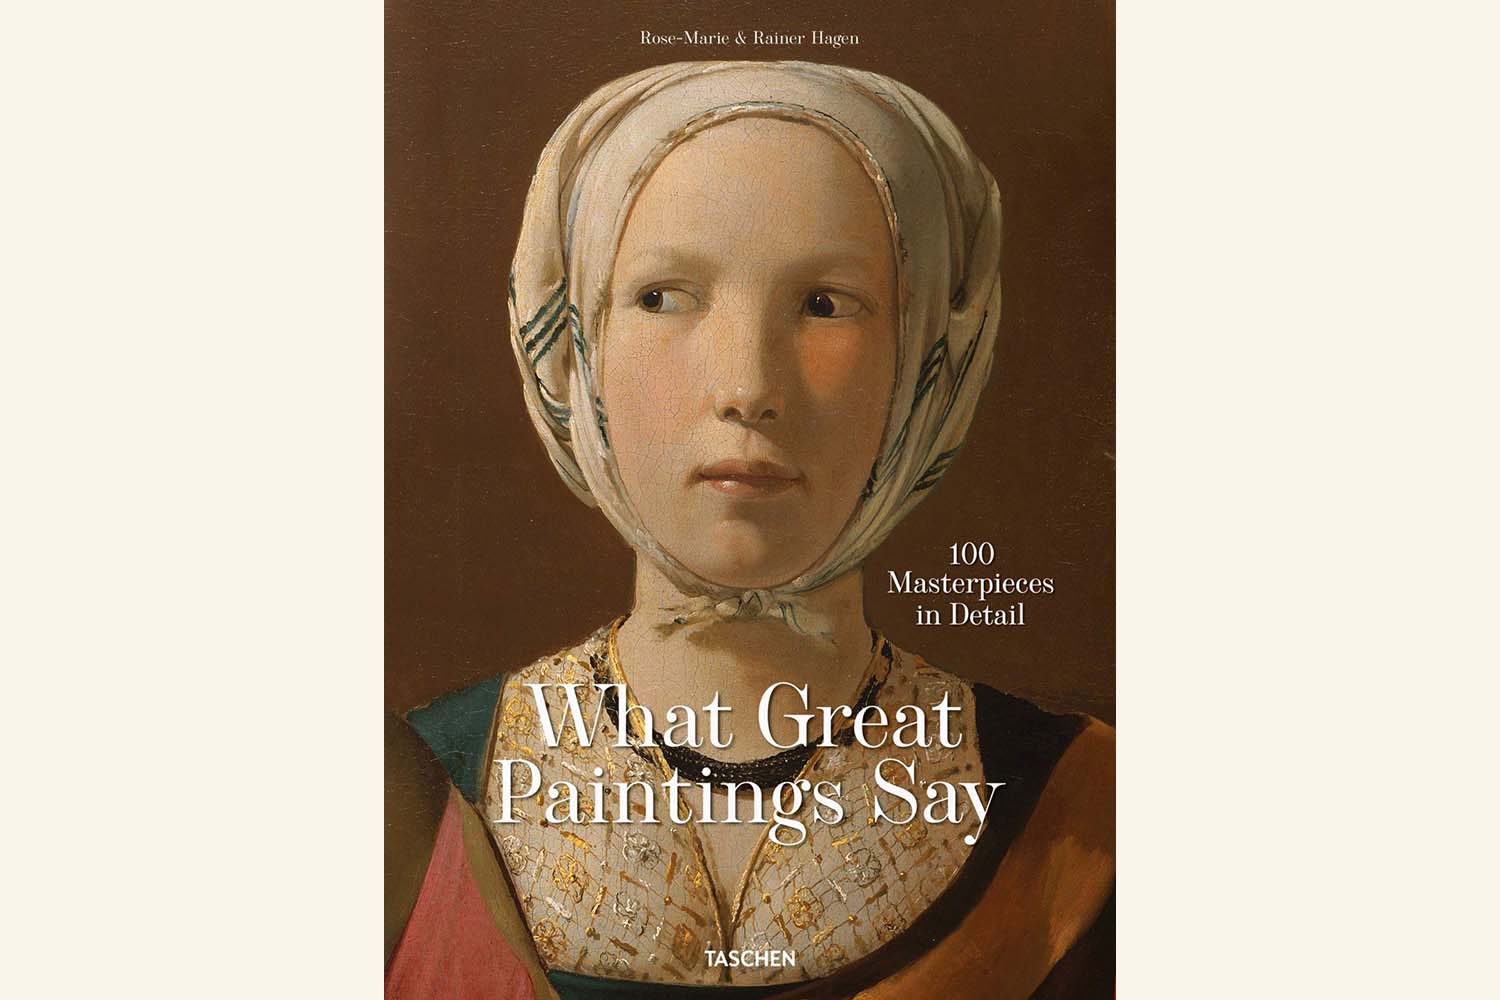 The Best Art History Books Every Art Lover Should Read: What Great Paintings Say, by Rose-Marie and Rainer Hagen